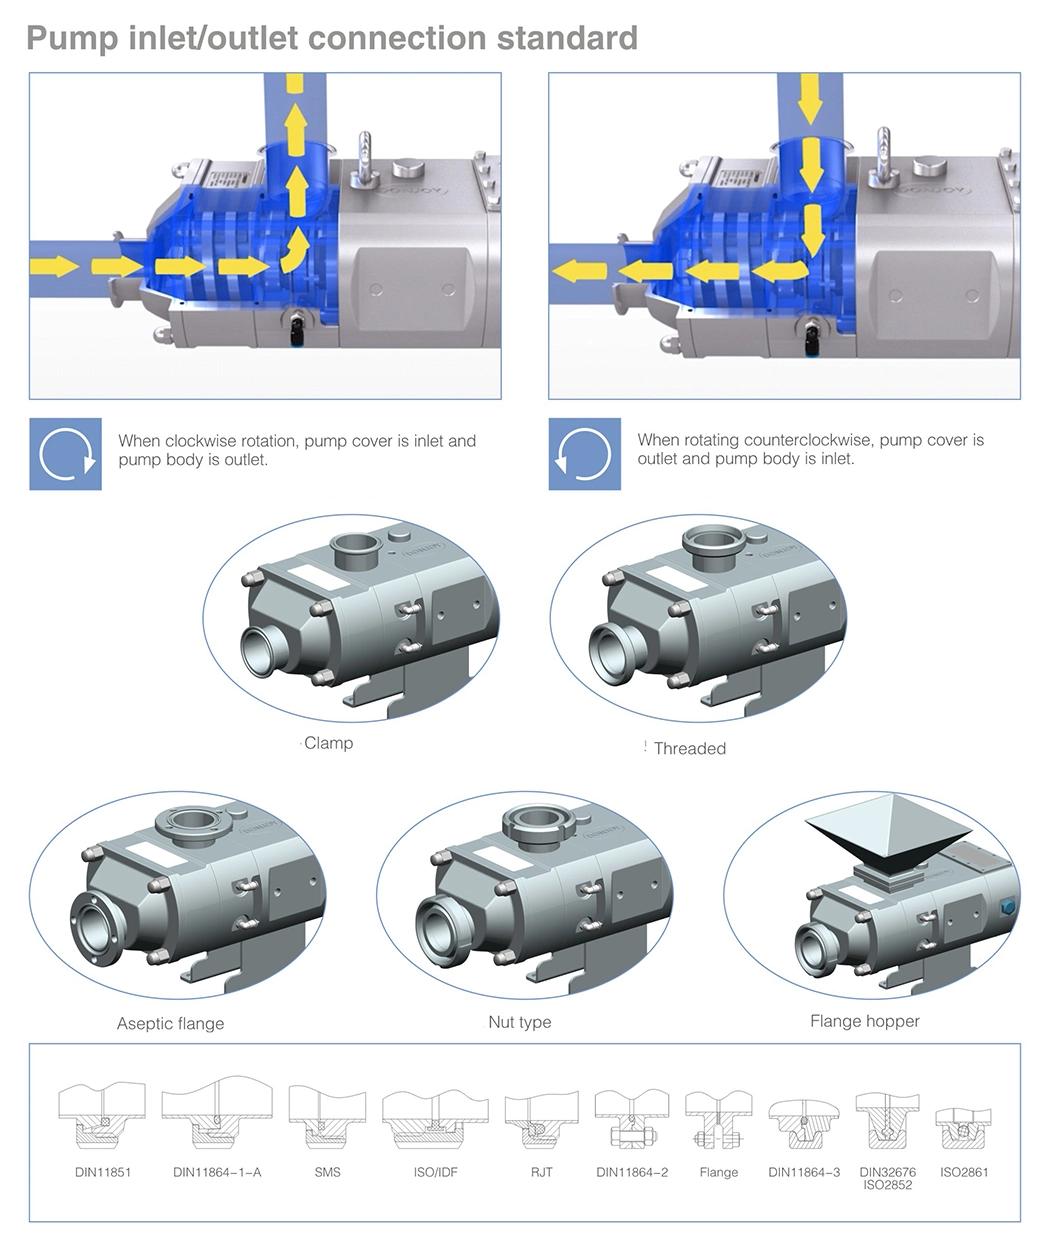 3A Certified Low Shear Twin Screw Pump for Food Beverage Processing